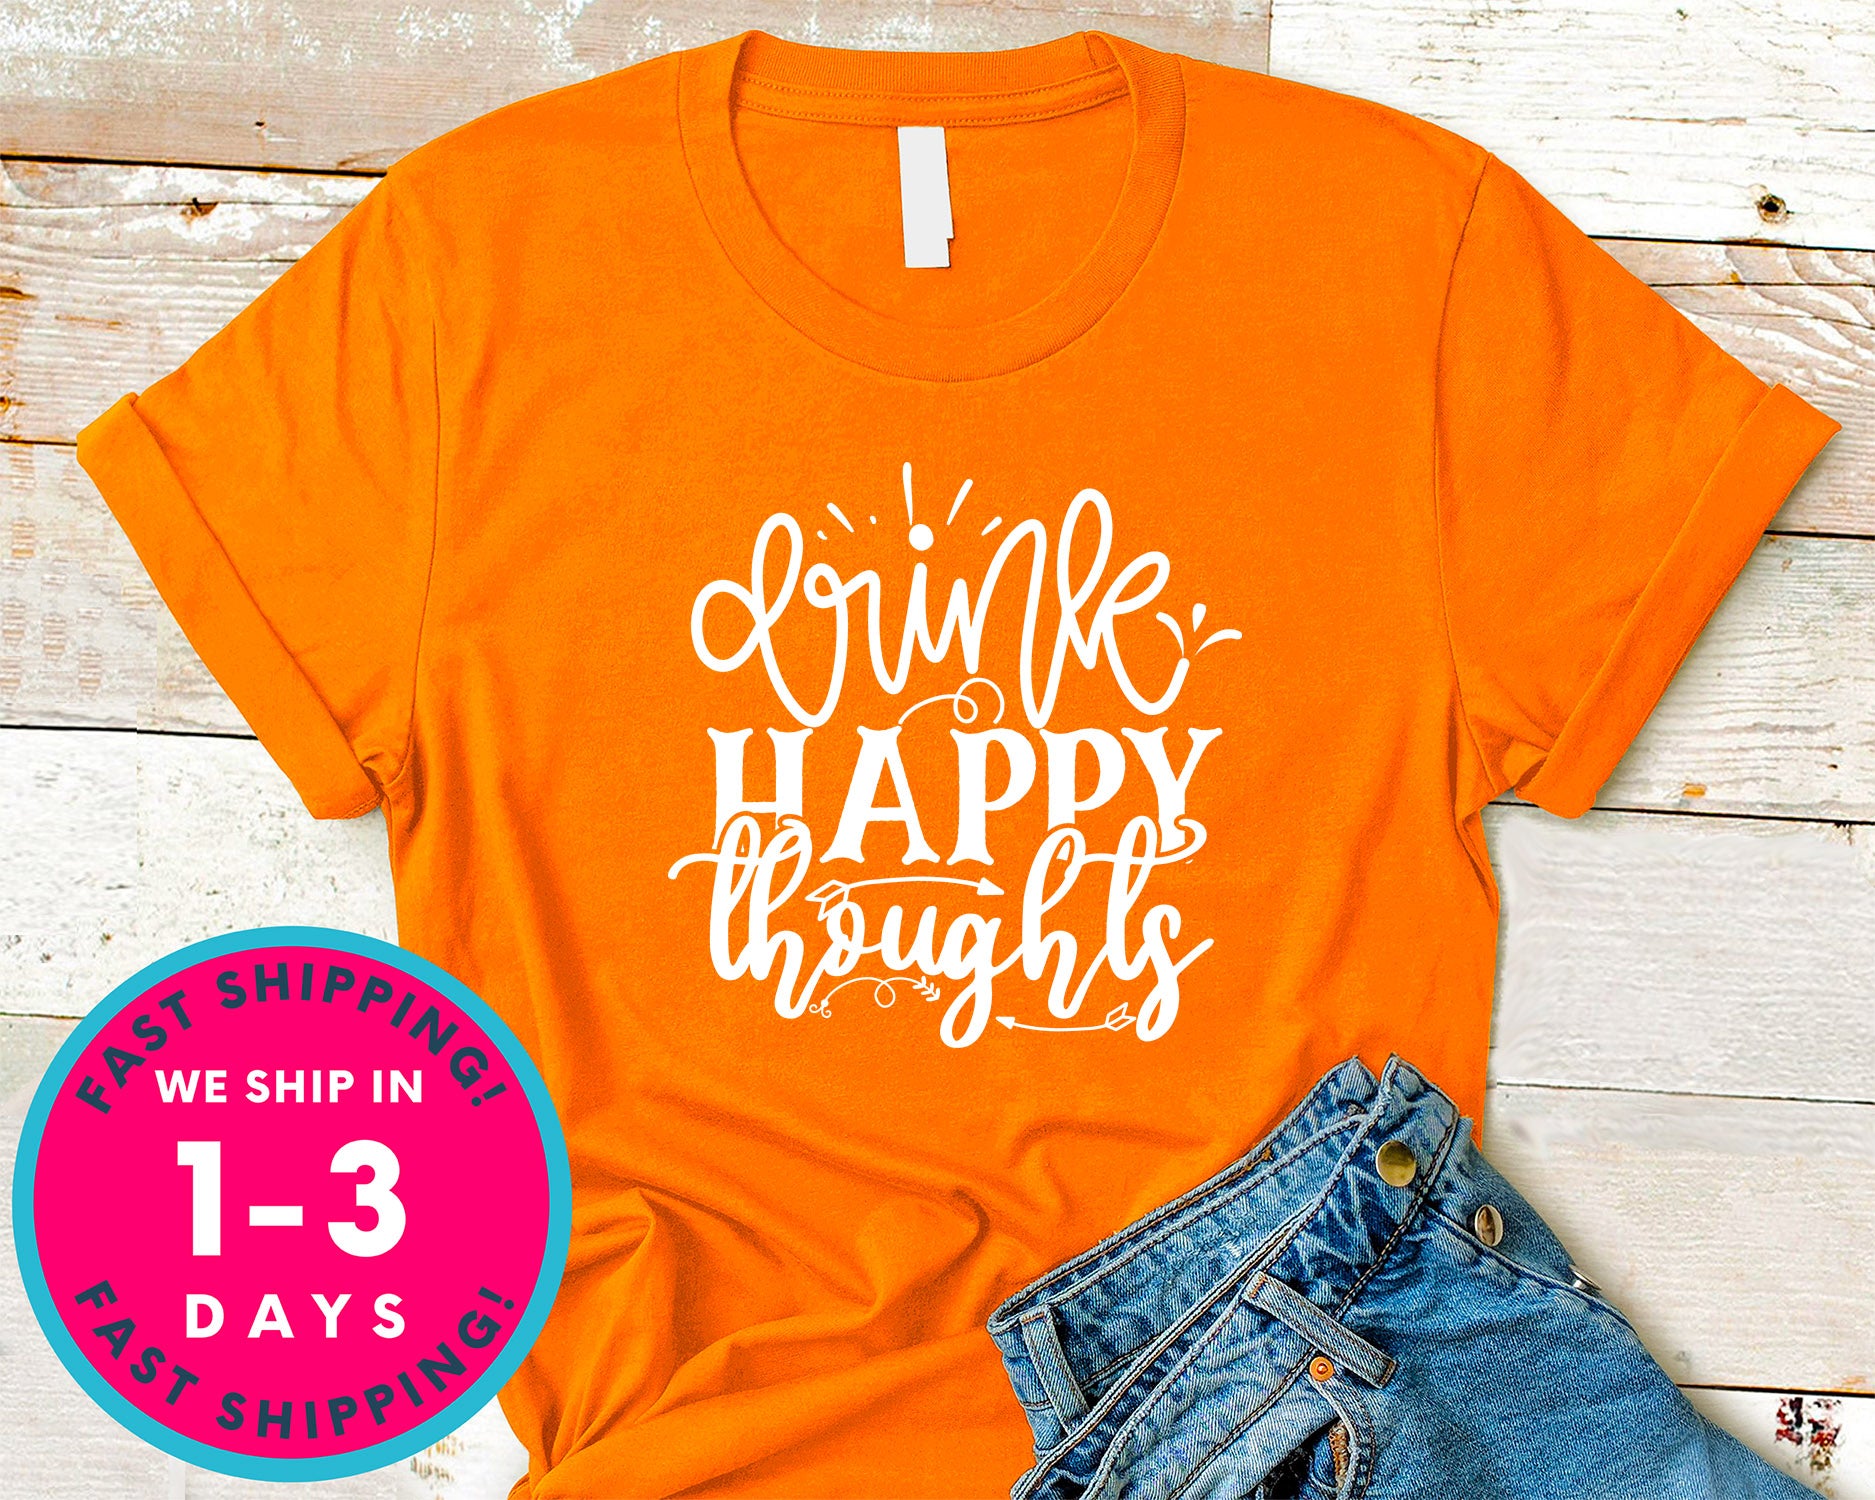 Drink Happy Thoughts